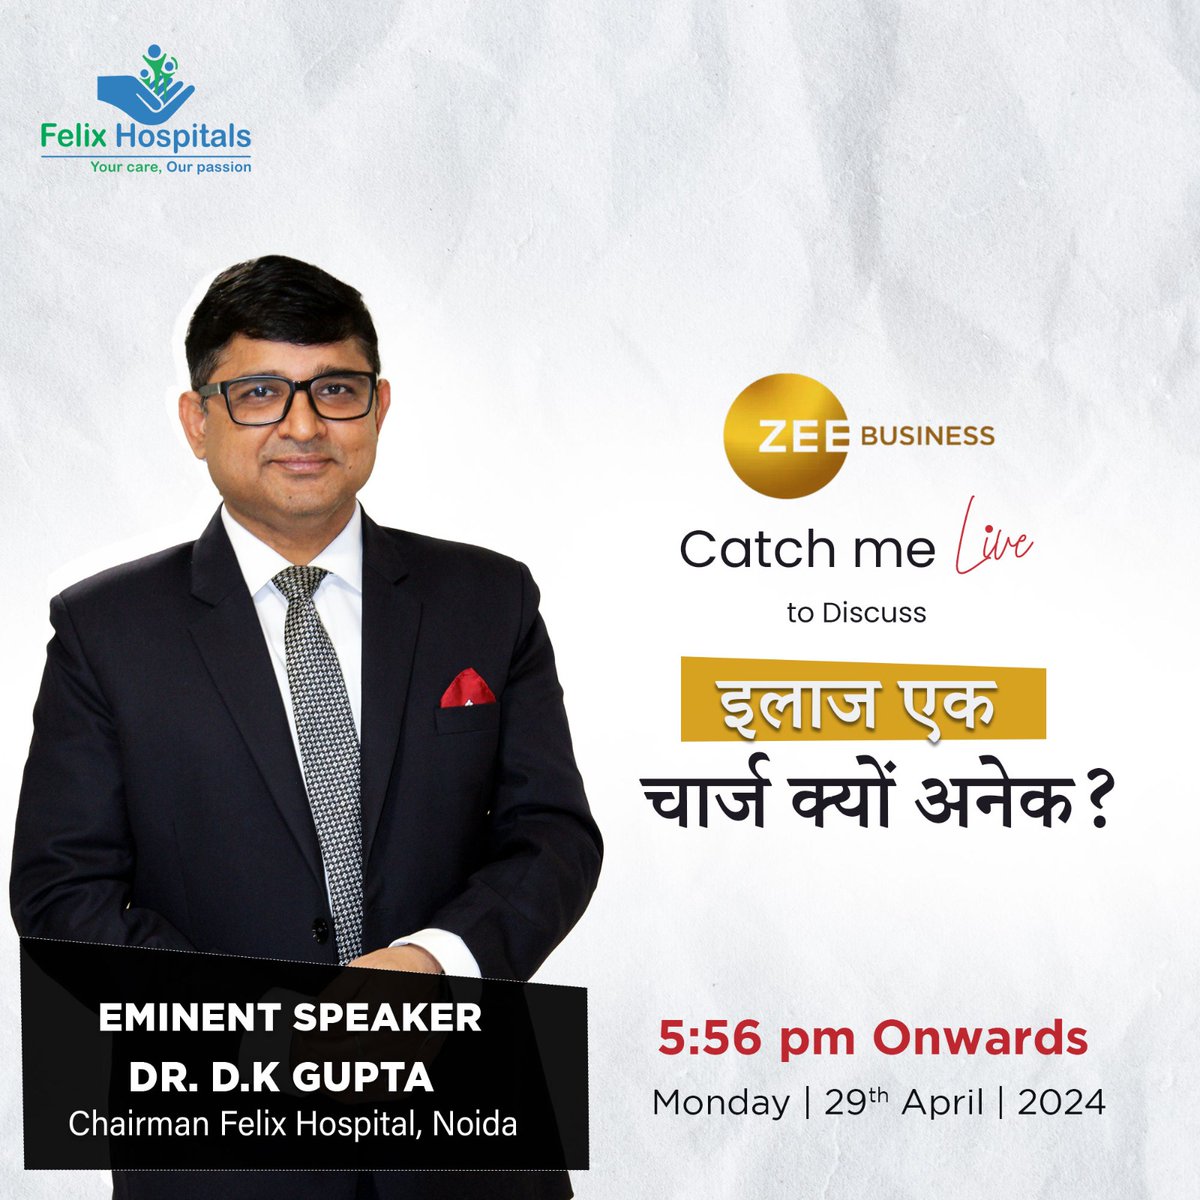 Tune in to hear me talk about the tough truth on Zee Business at 5.56 pm: Even with health insurance, medical expenses can still weigh heavily on us. Let's find sustainable solutions together to make quality healthcare easier on everyone's wallet and more within reach.